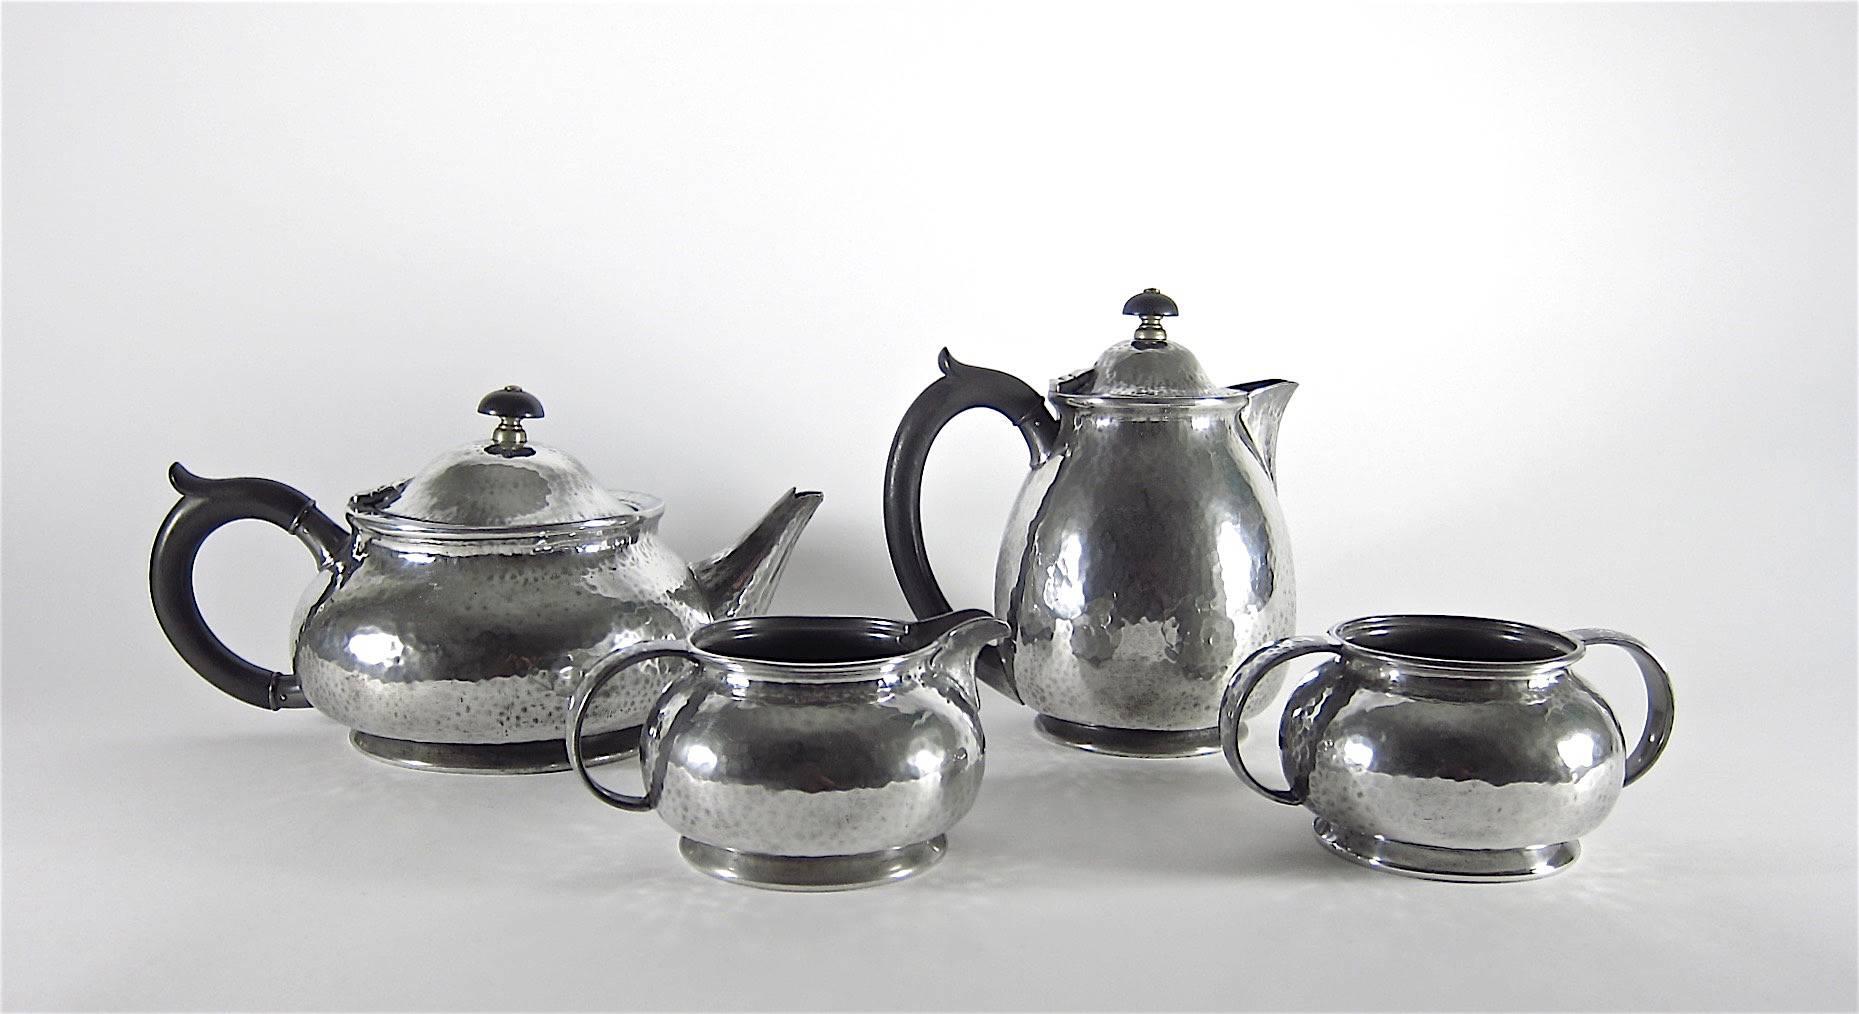 An early 20th century English Arts and Crafts pewter tea set comprised of four pieces: A teapot, hot water pot, cream pitcher and open sugar bowl. The larger pieces feature hinged lids with carved and turned handles and finials of ebonized wood.